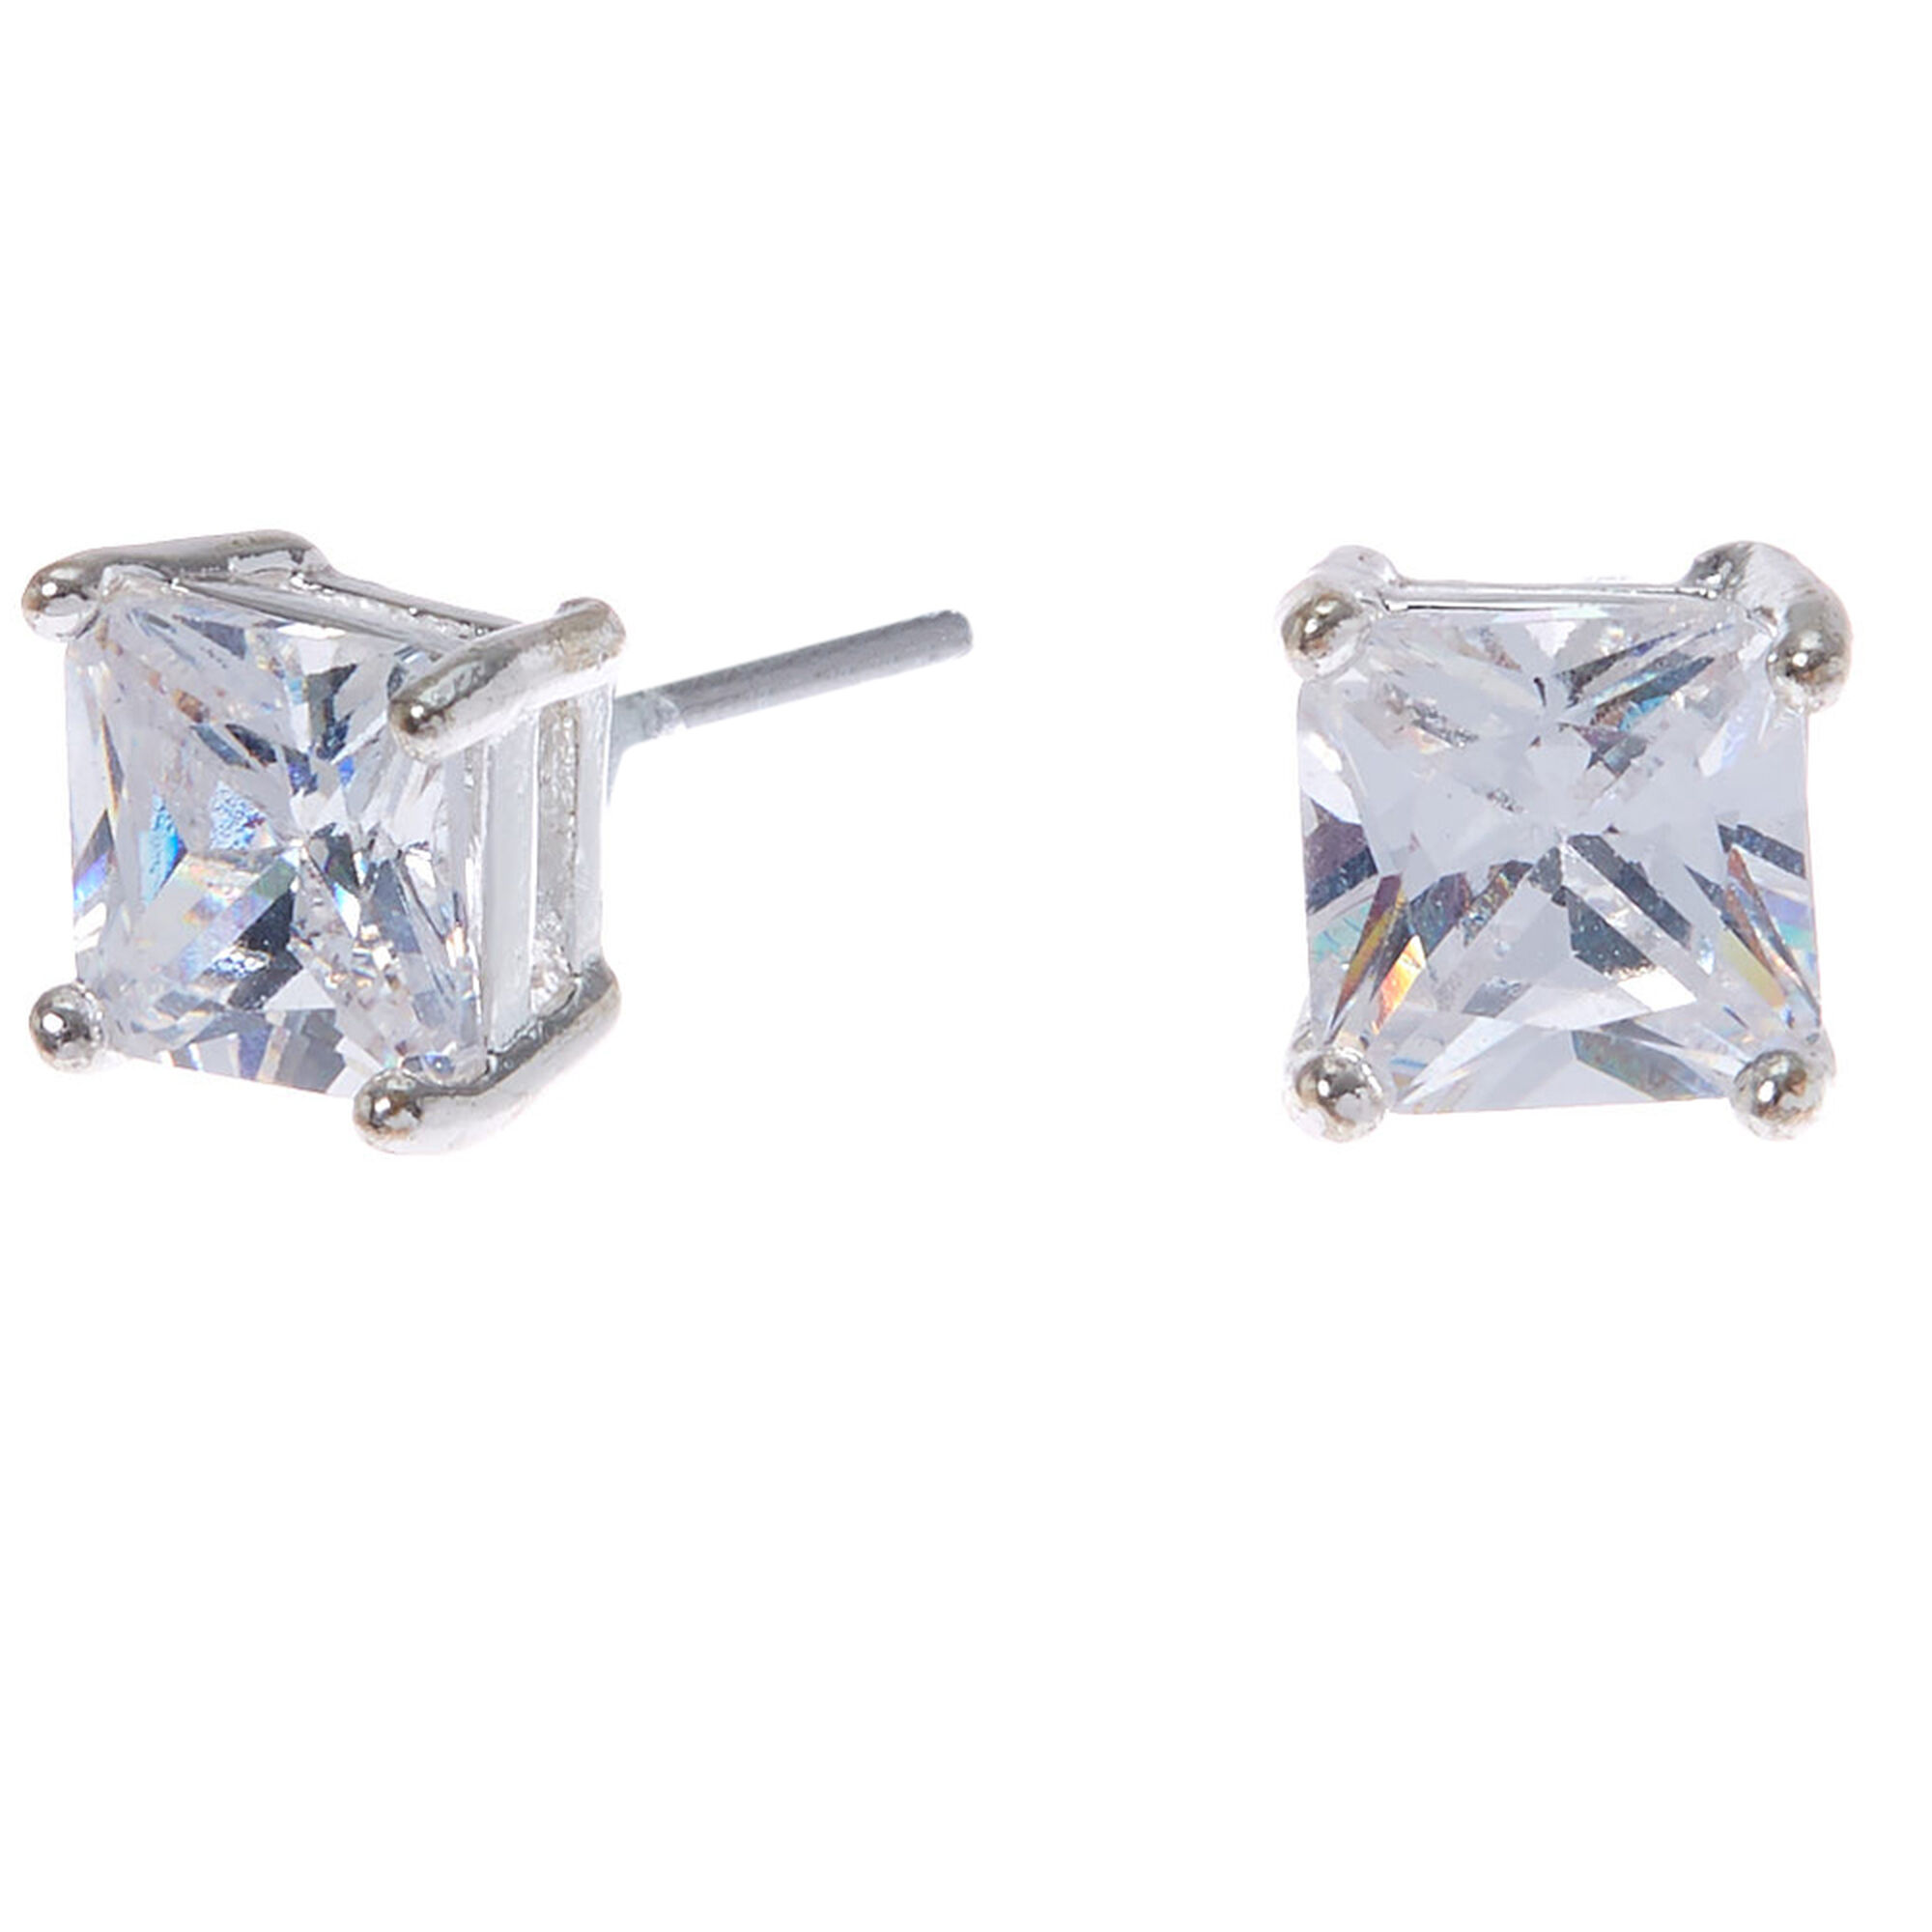 View Claires Tone Cubic Zirconia Square Stud Earrings 6MM Silver information